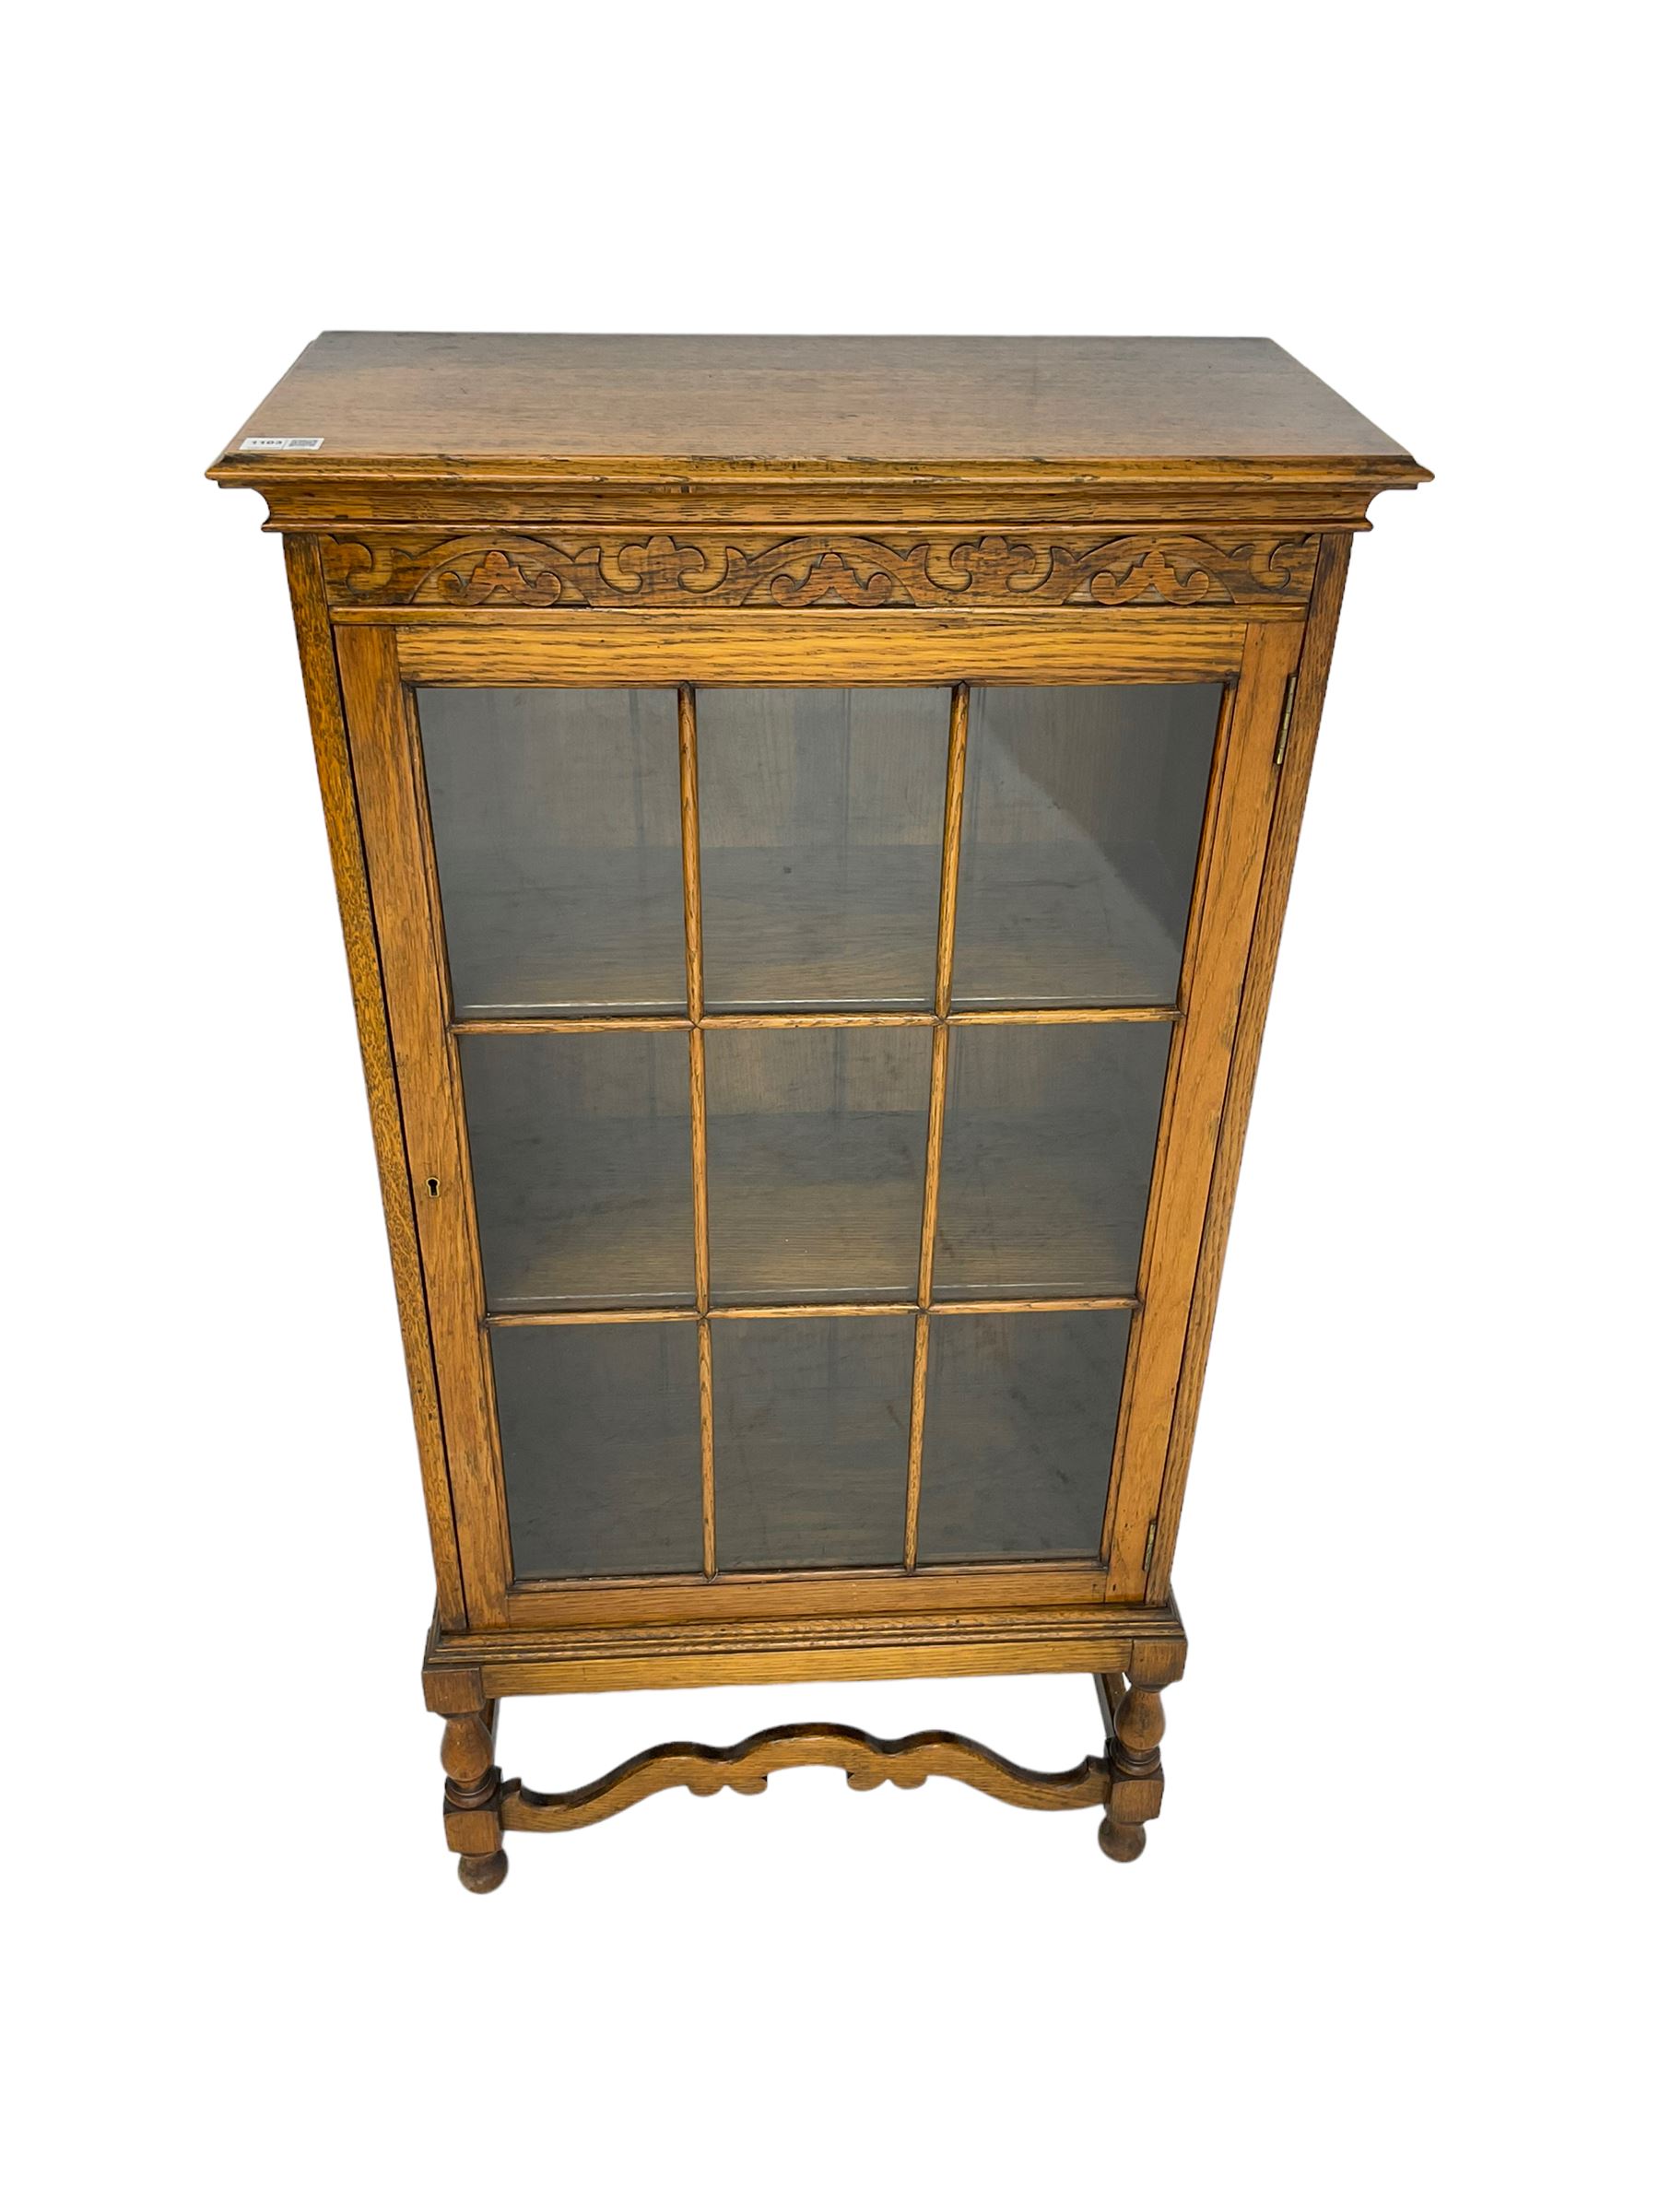 Early 20th century oak bookcase display cabinet - Image 2 of 6